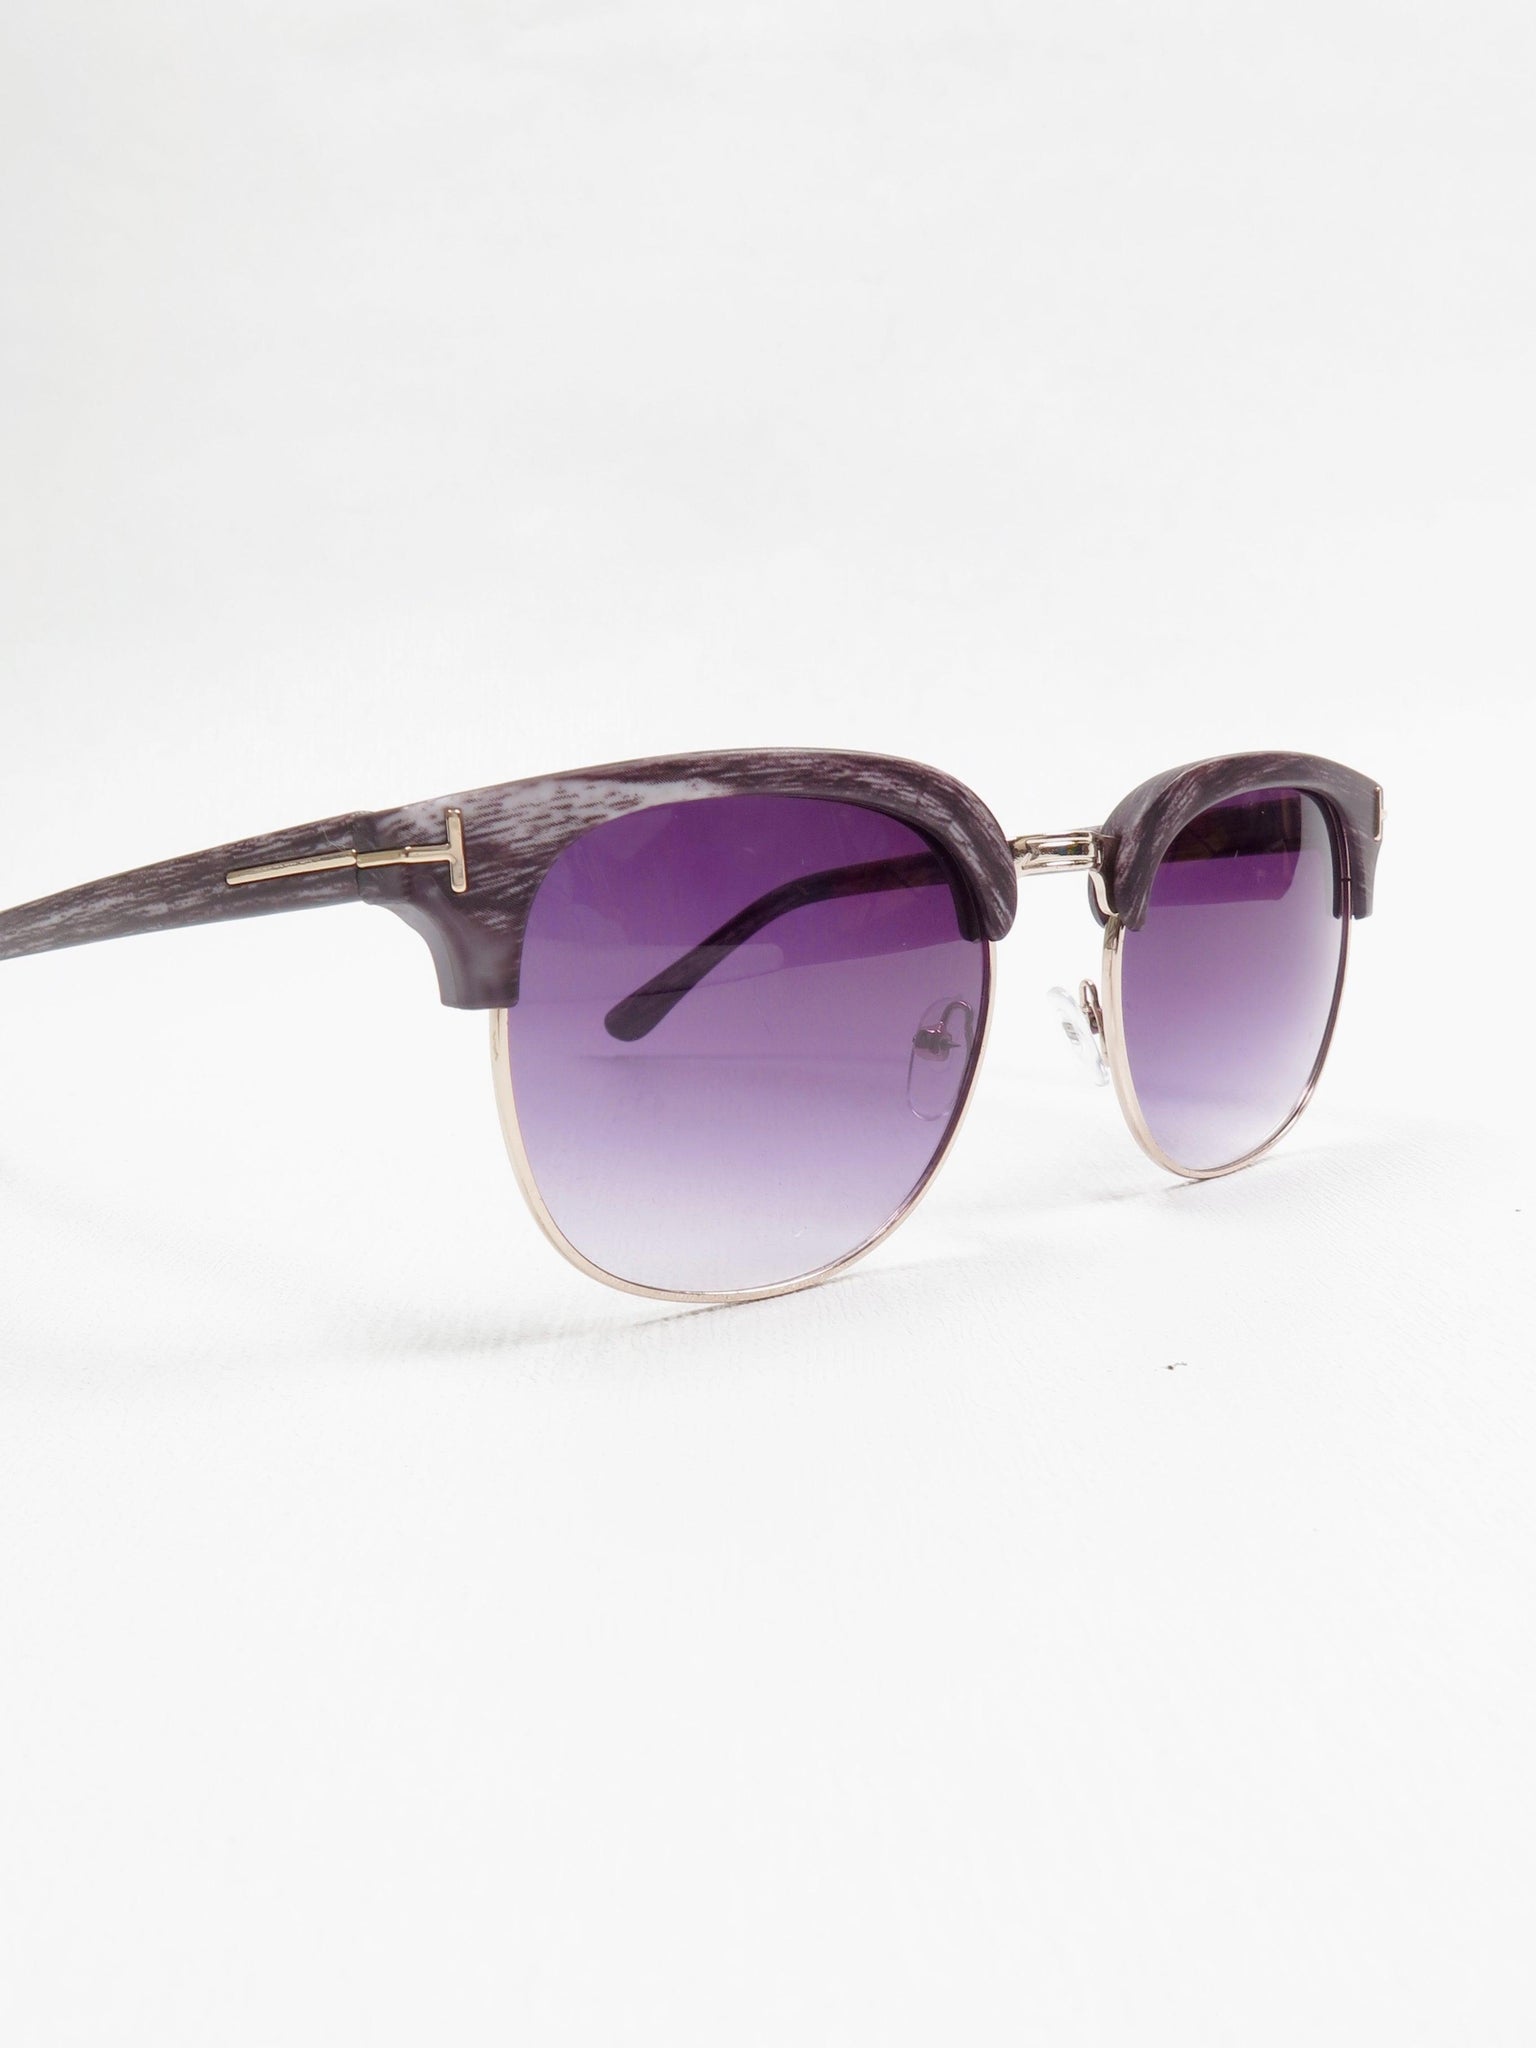 Club-master Style Sunglasses With Different Frames - The Harlequin